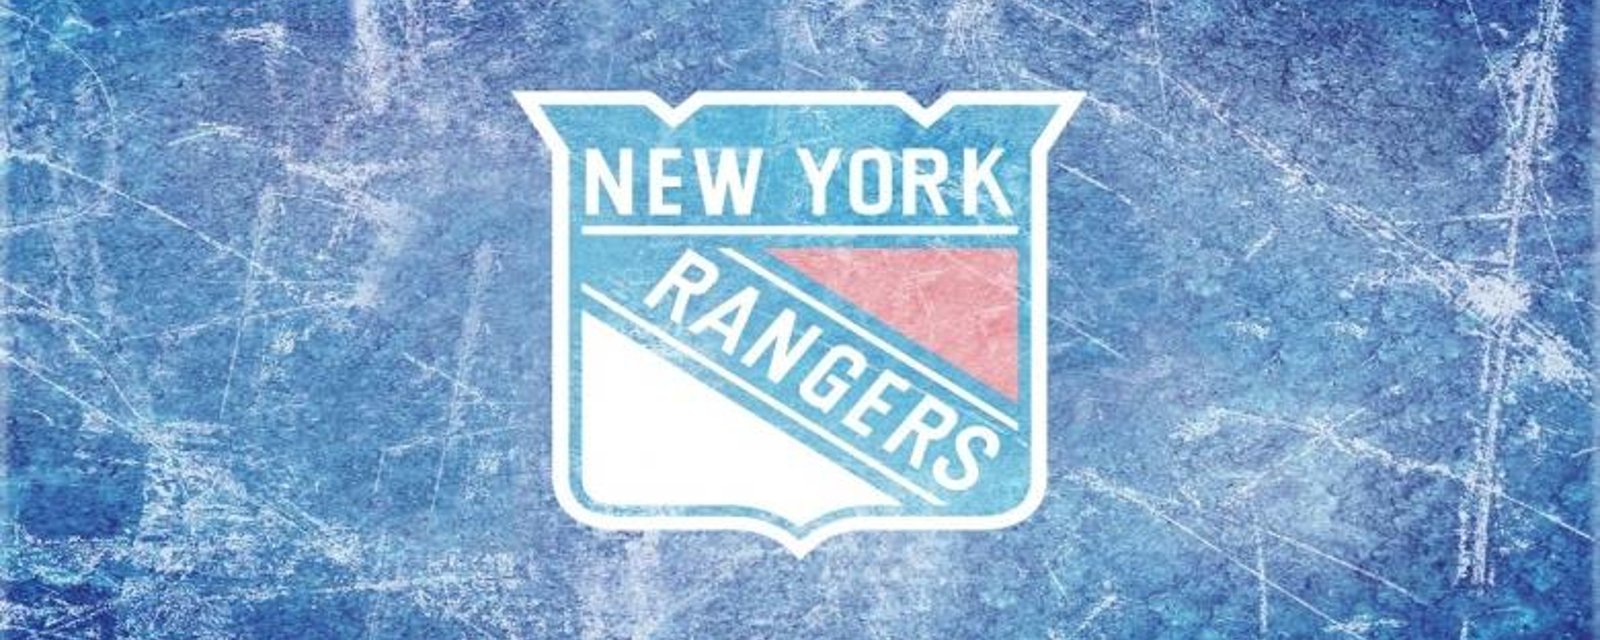 Can the Rangers once again win the Metropolitan Division?